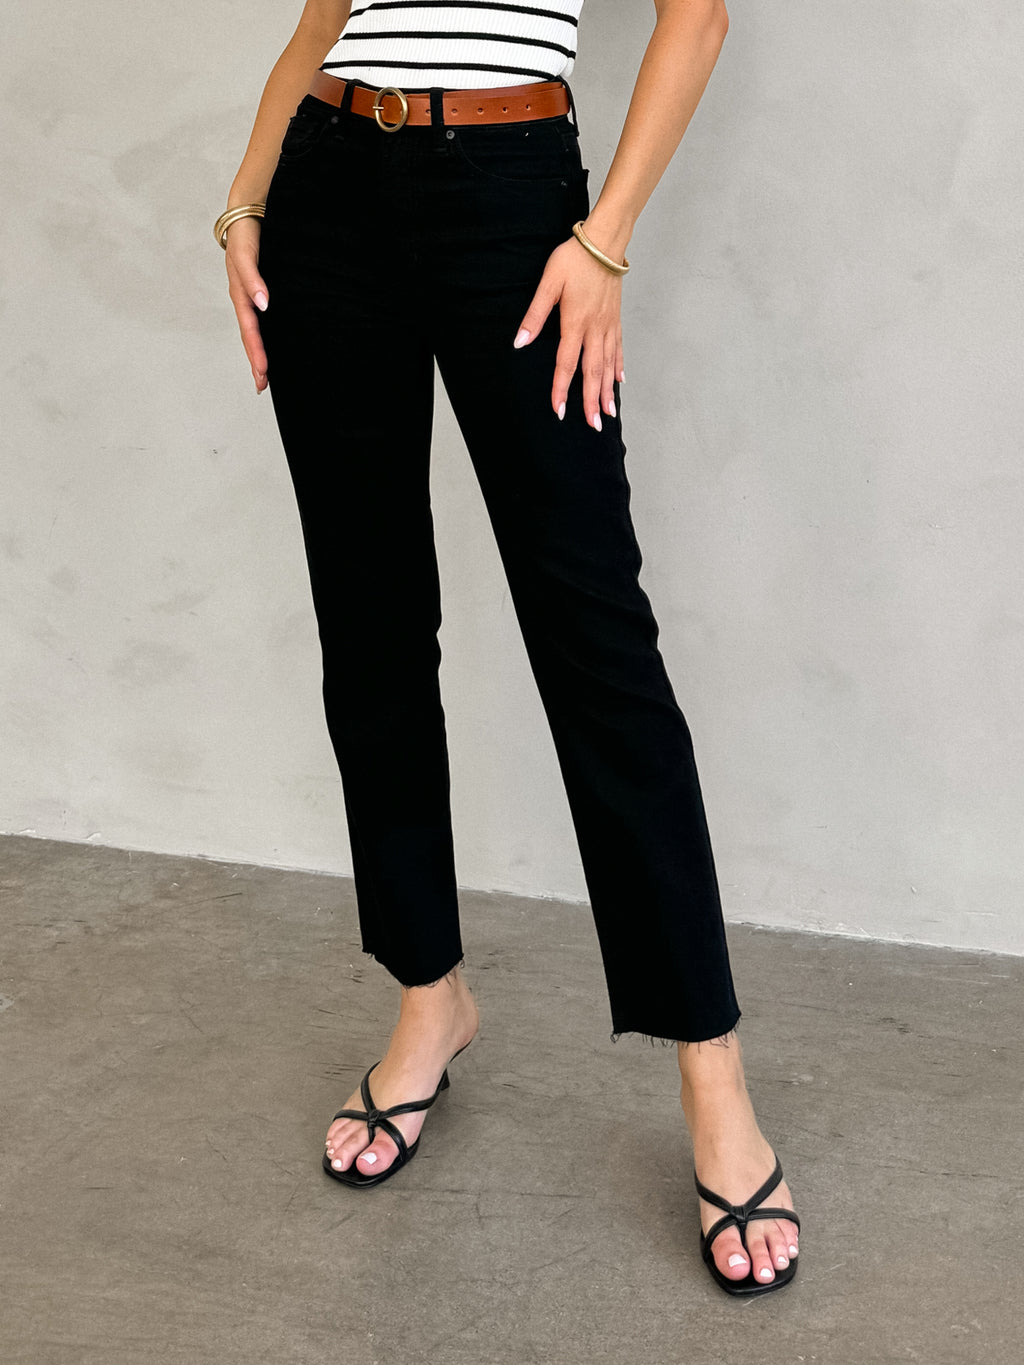 Cut It Off Crop Straight Jeans in Black - Stitch And Feather